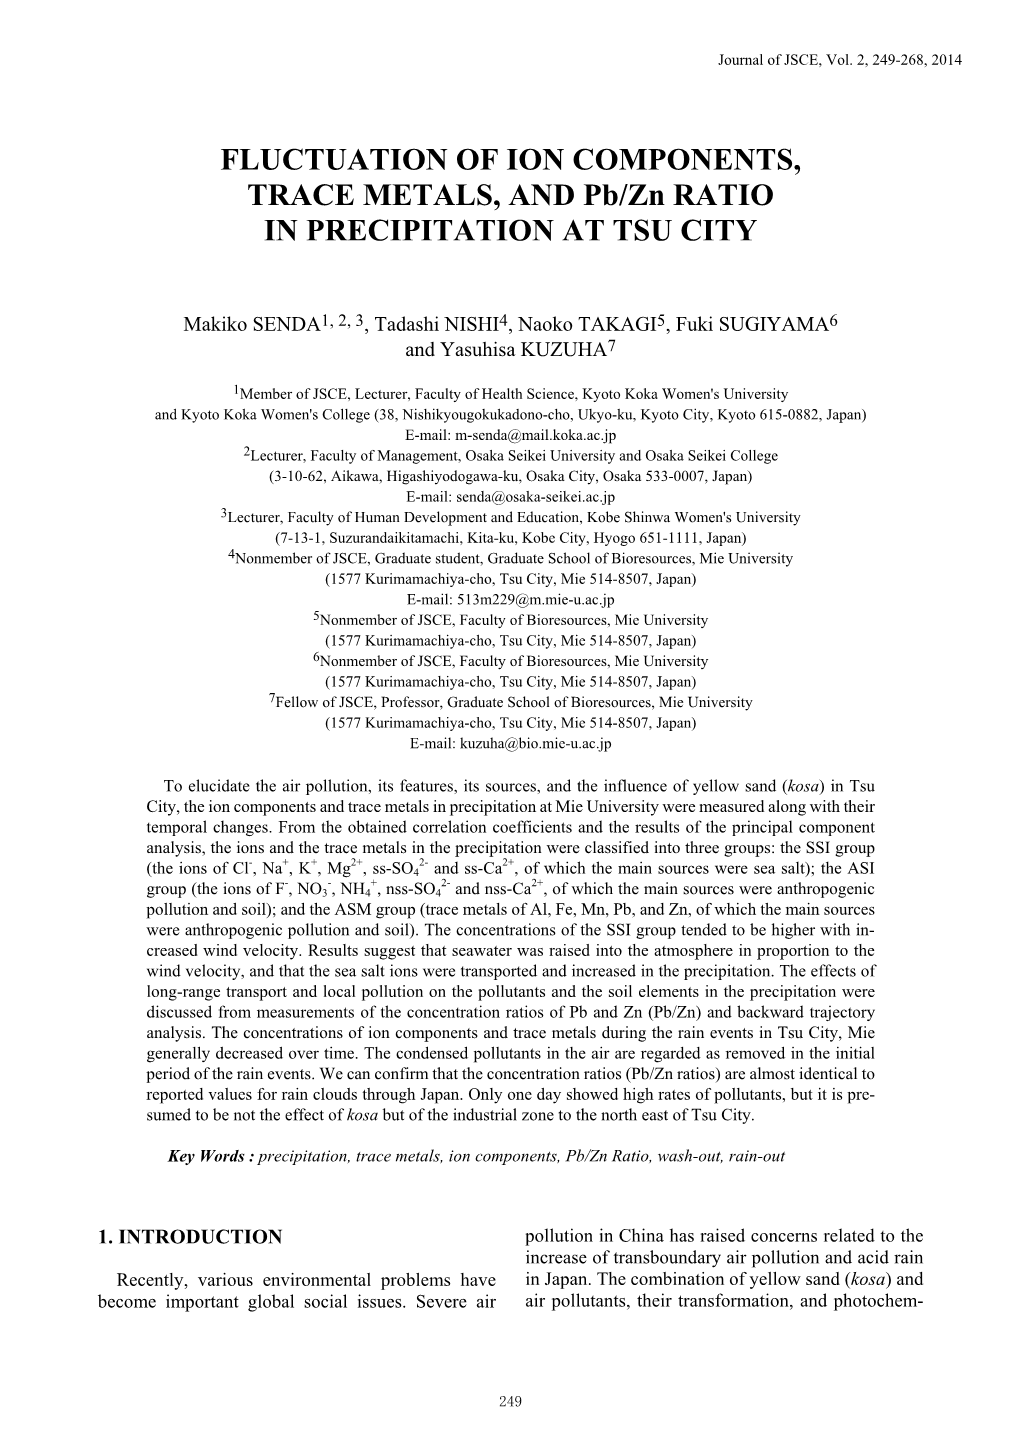 FLUCTUATION of ION COMPONENTS, TRACE METALS, and Pb/Zn RATIO in PRECIPITATION at TSU CITY